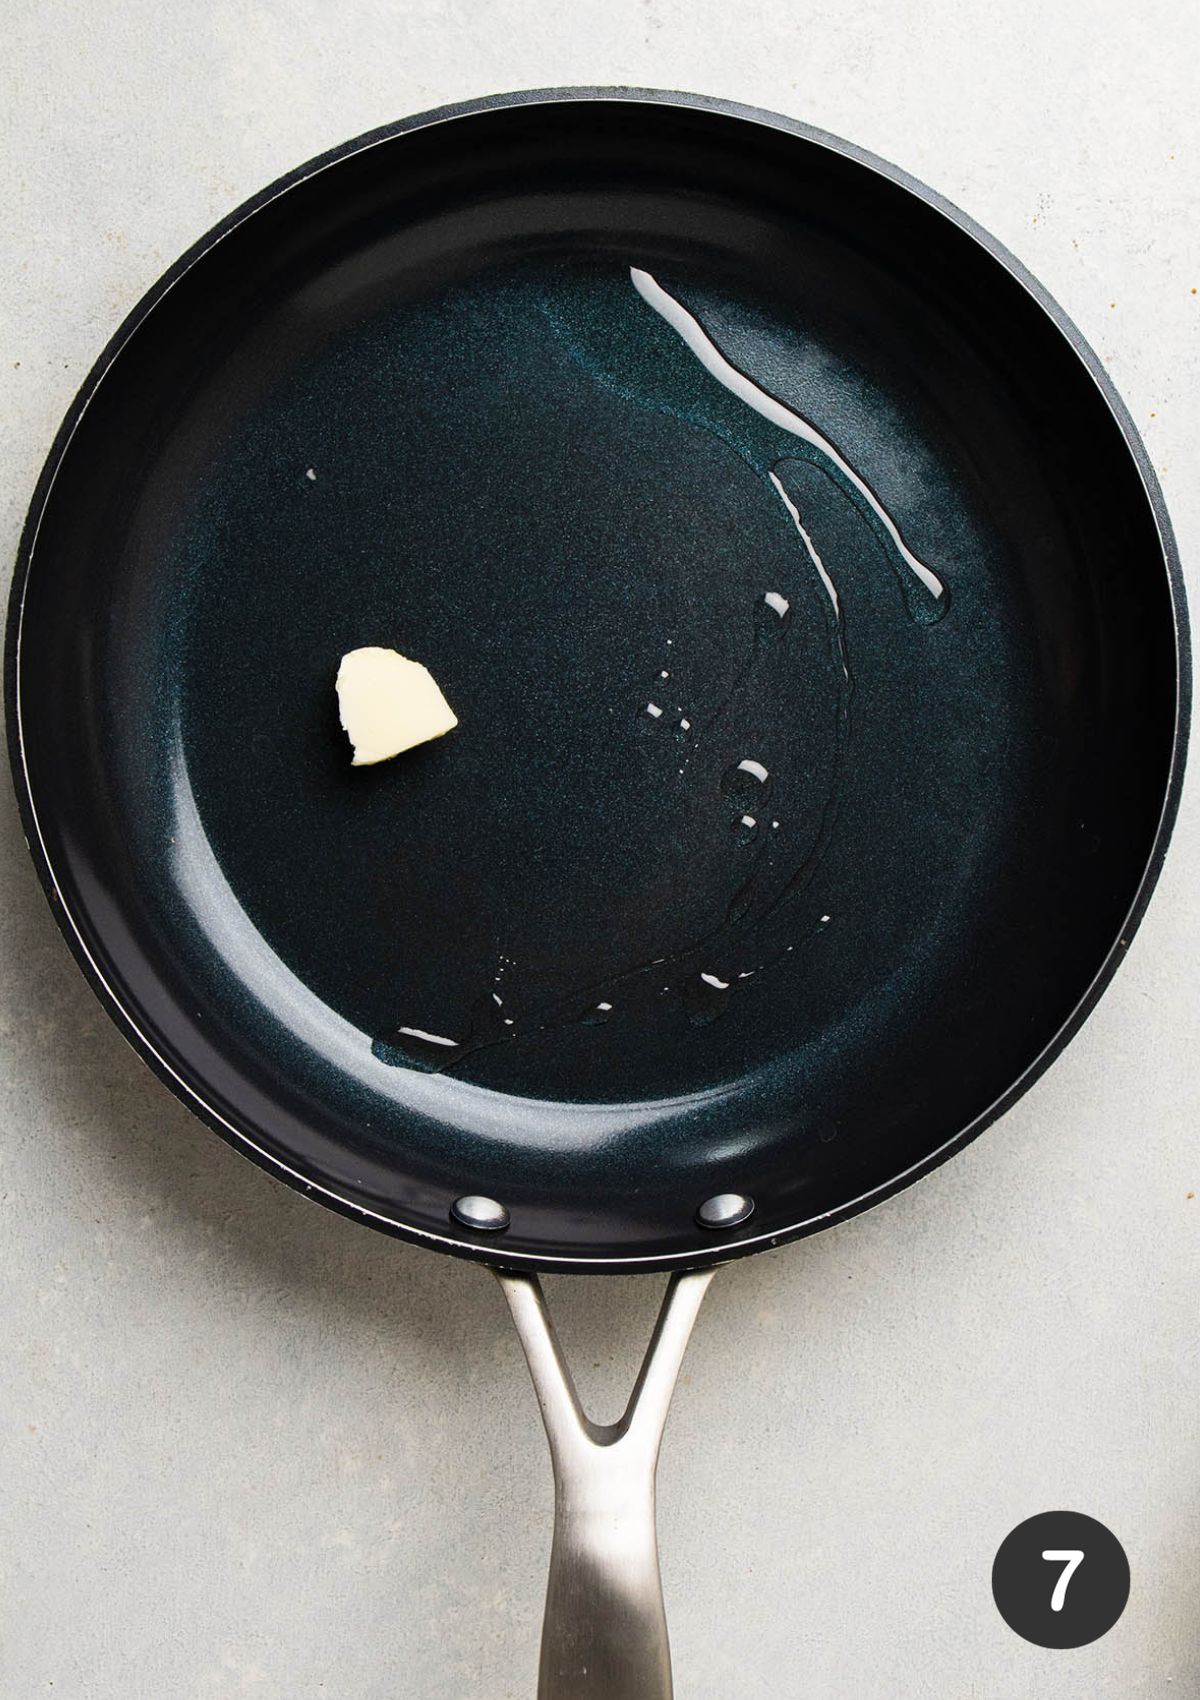 Melting butter in a large skillet with a drizzle of grapeseed oil.